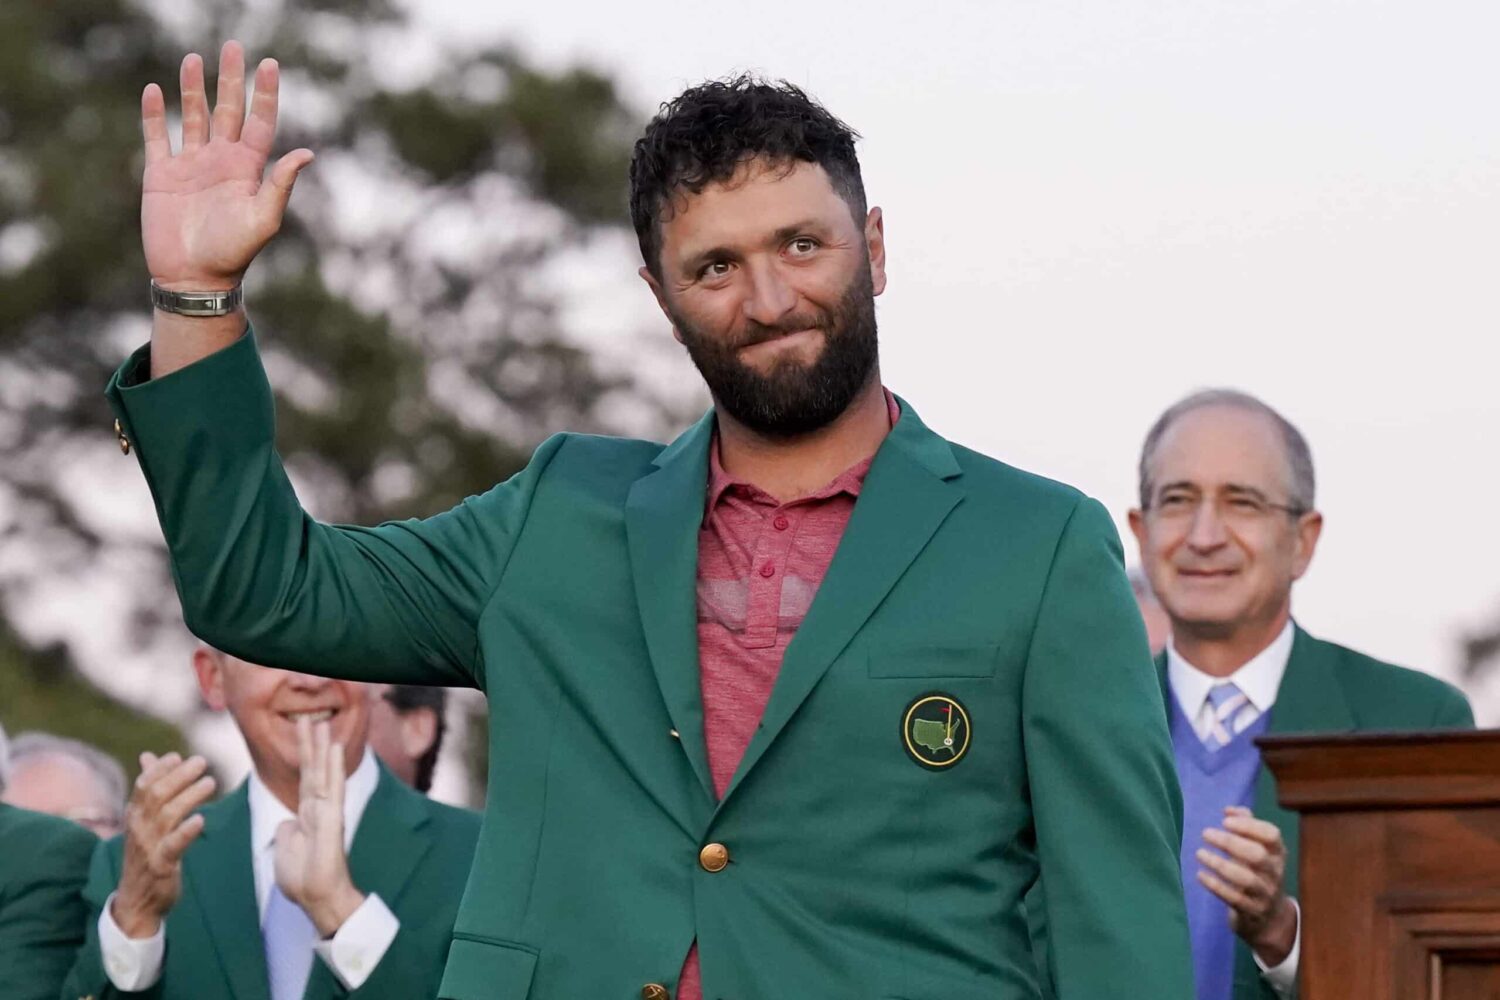 2023 Masters purse breakdown: How much Jon Rahm was paid for winning